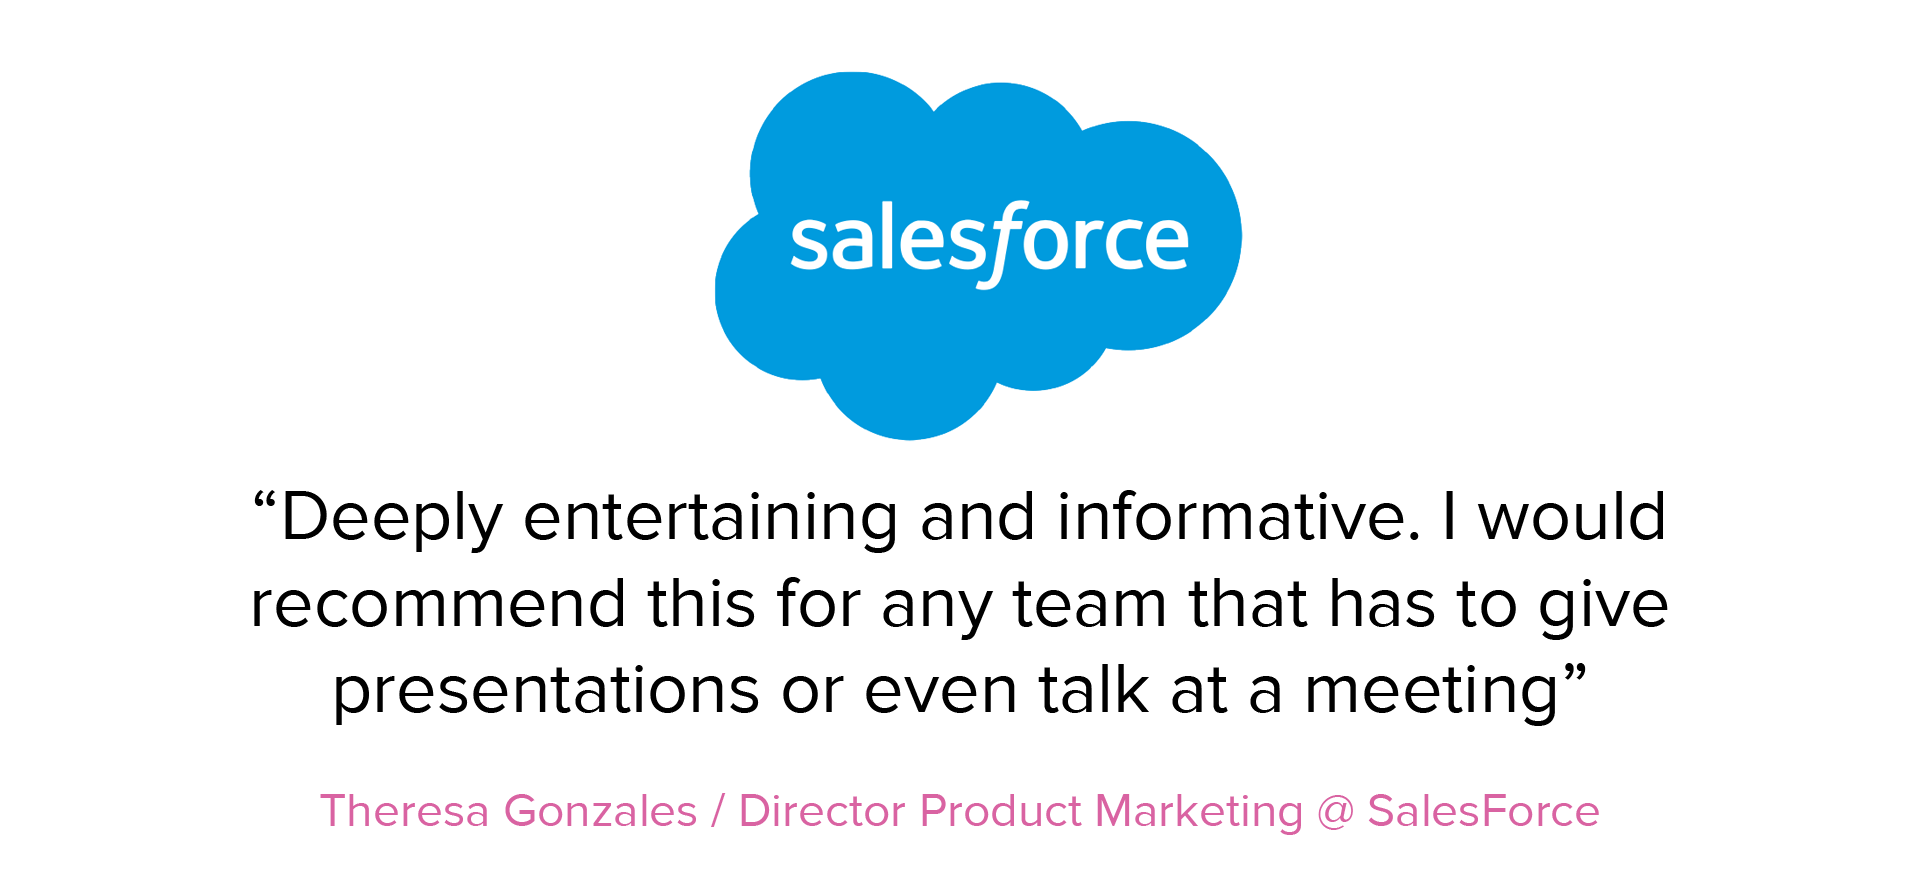 cred_salesforce.png